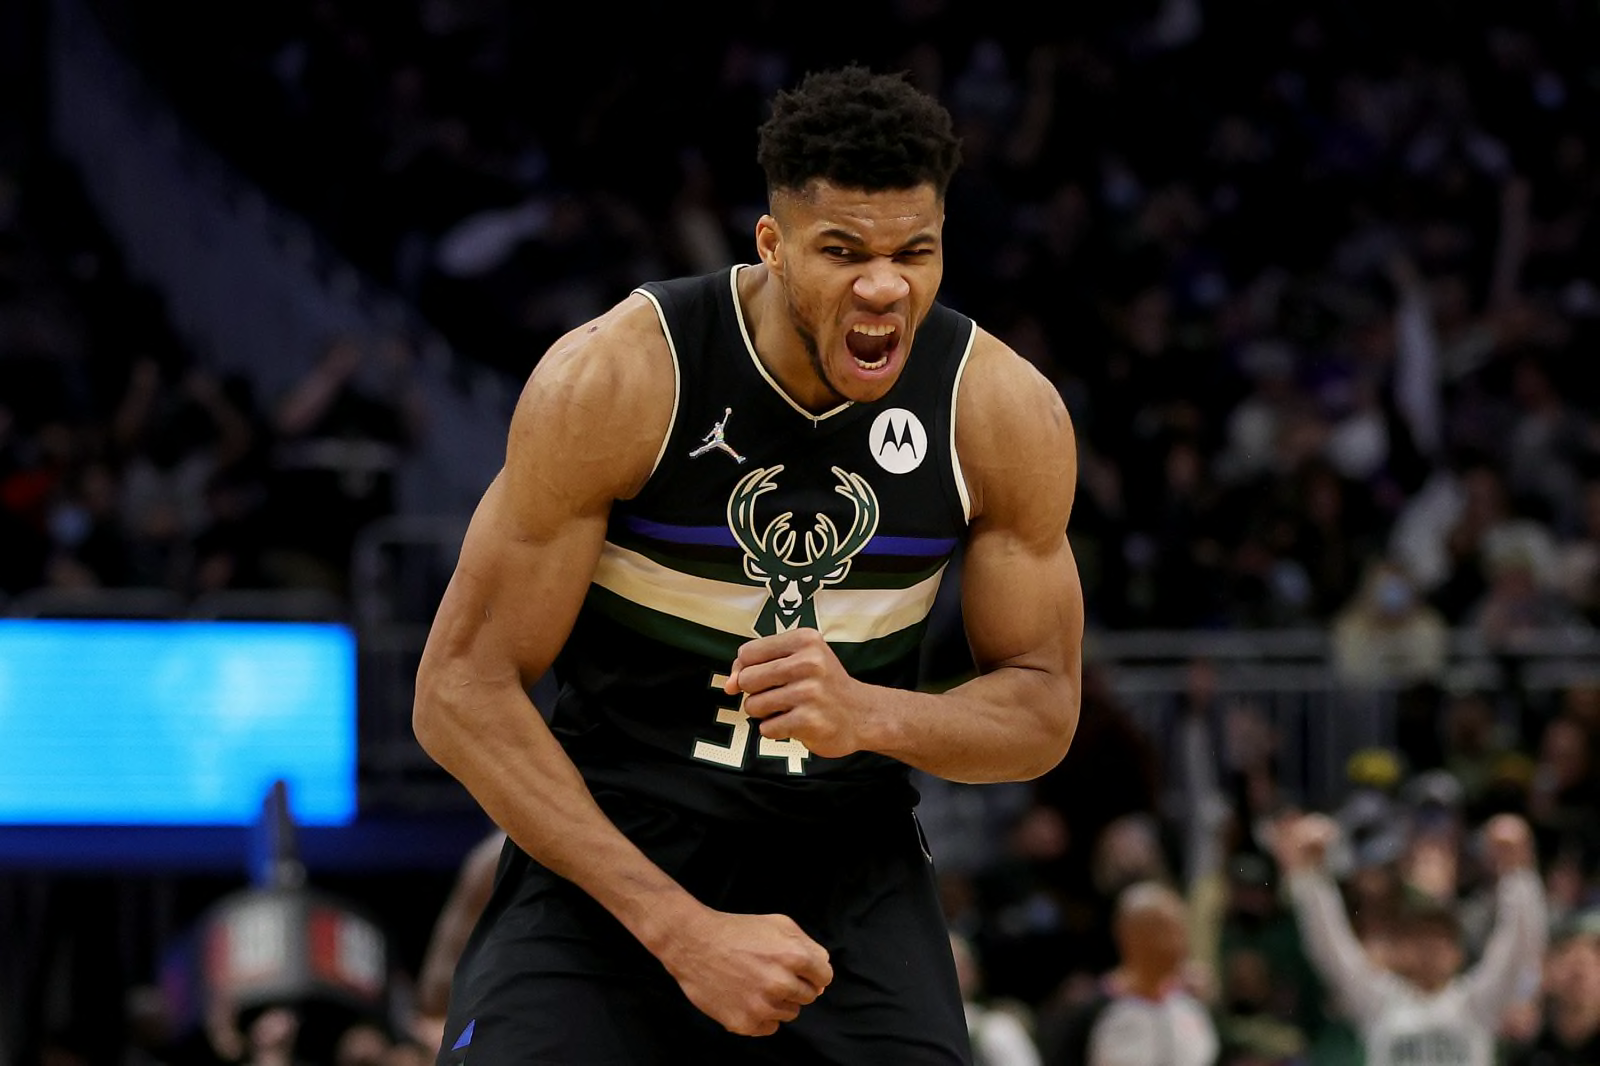 Giannis Antetokounmpo is dominating but no one seems to care